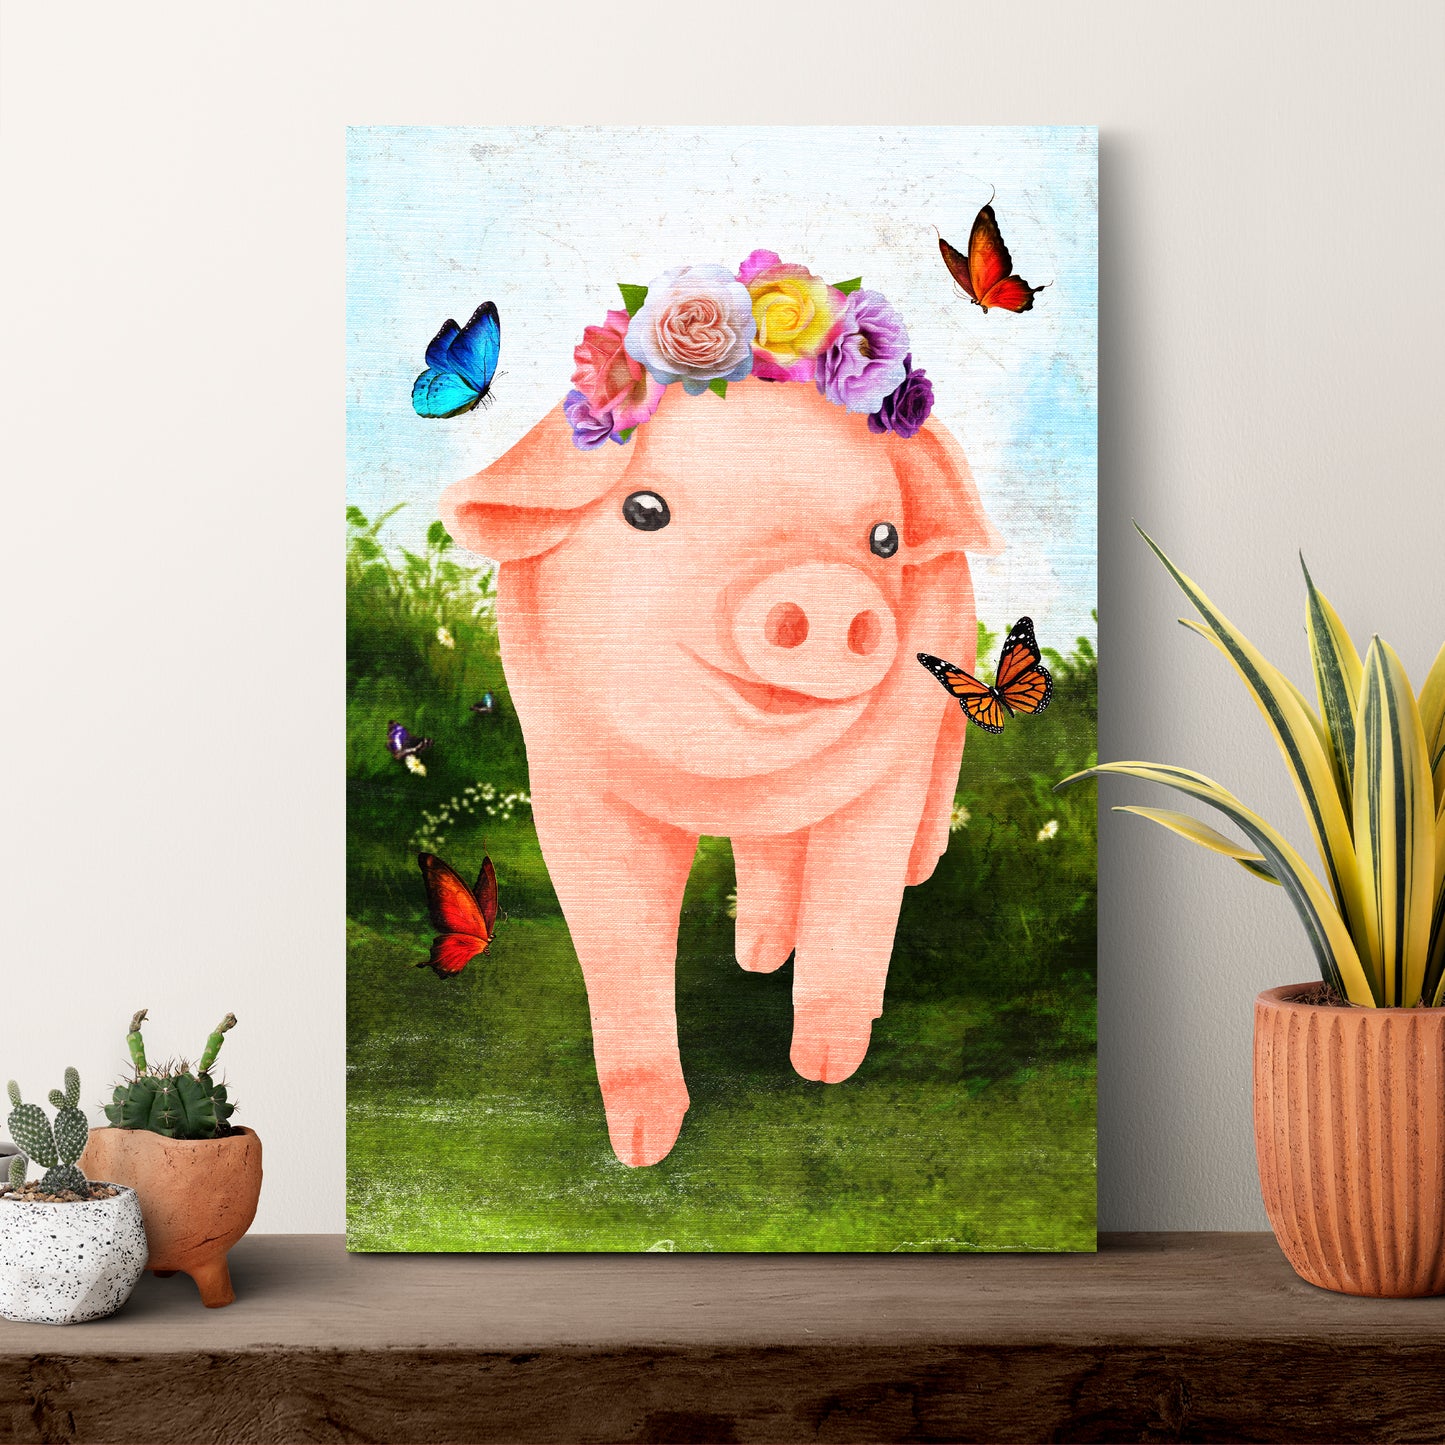 The Most Adorable Pig Canvas Wall Art Style 1 - Image by Tailored Canvases